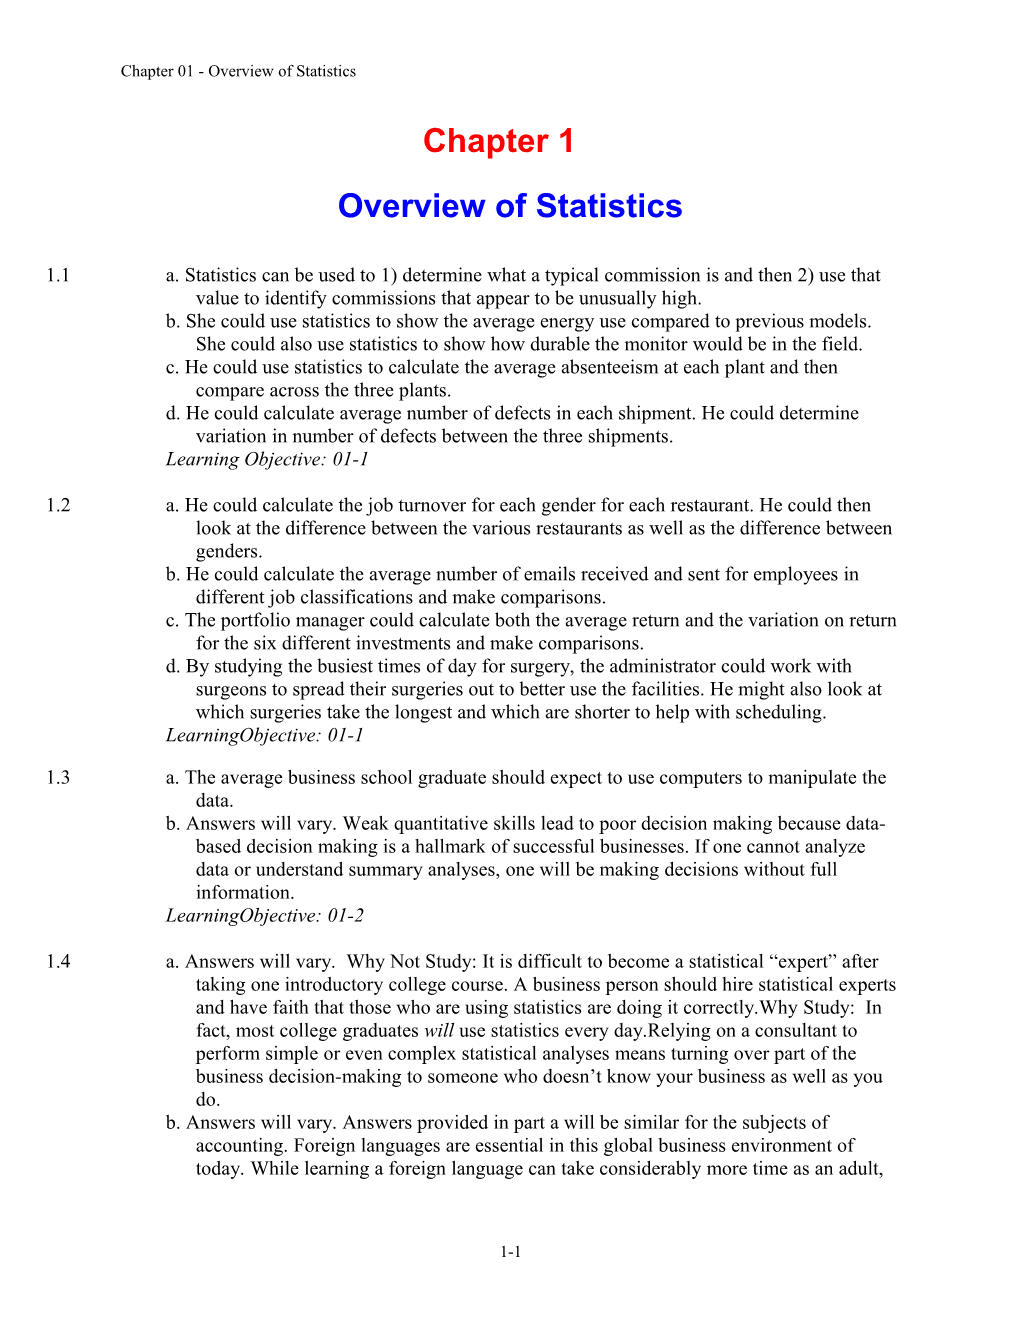 Chapter 1 - Overview of Statistics